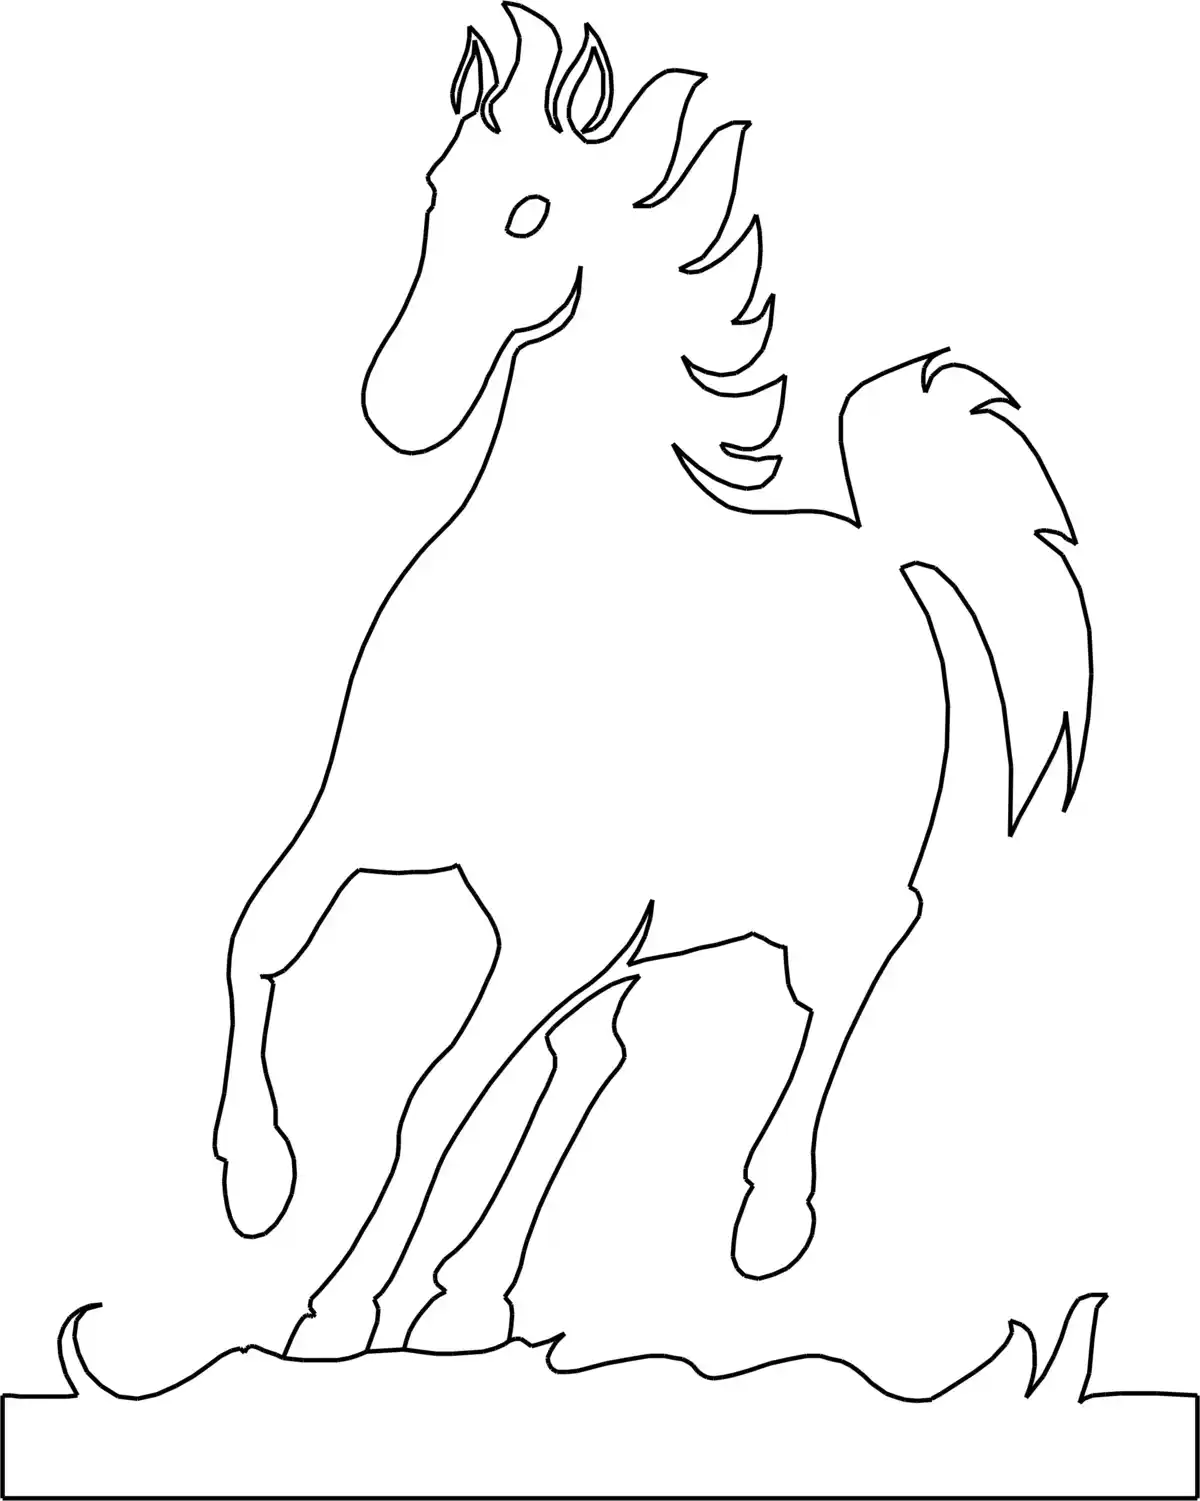 Free Download Coloring PDF, Horse Animal Coloring Pages Pdf